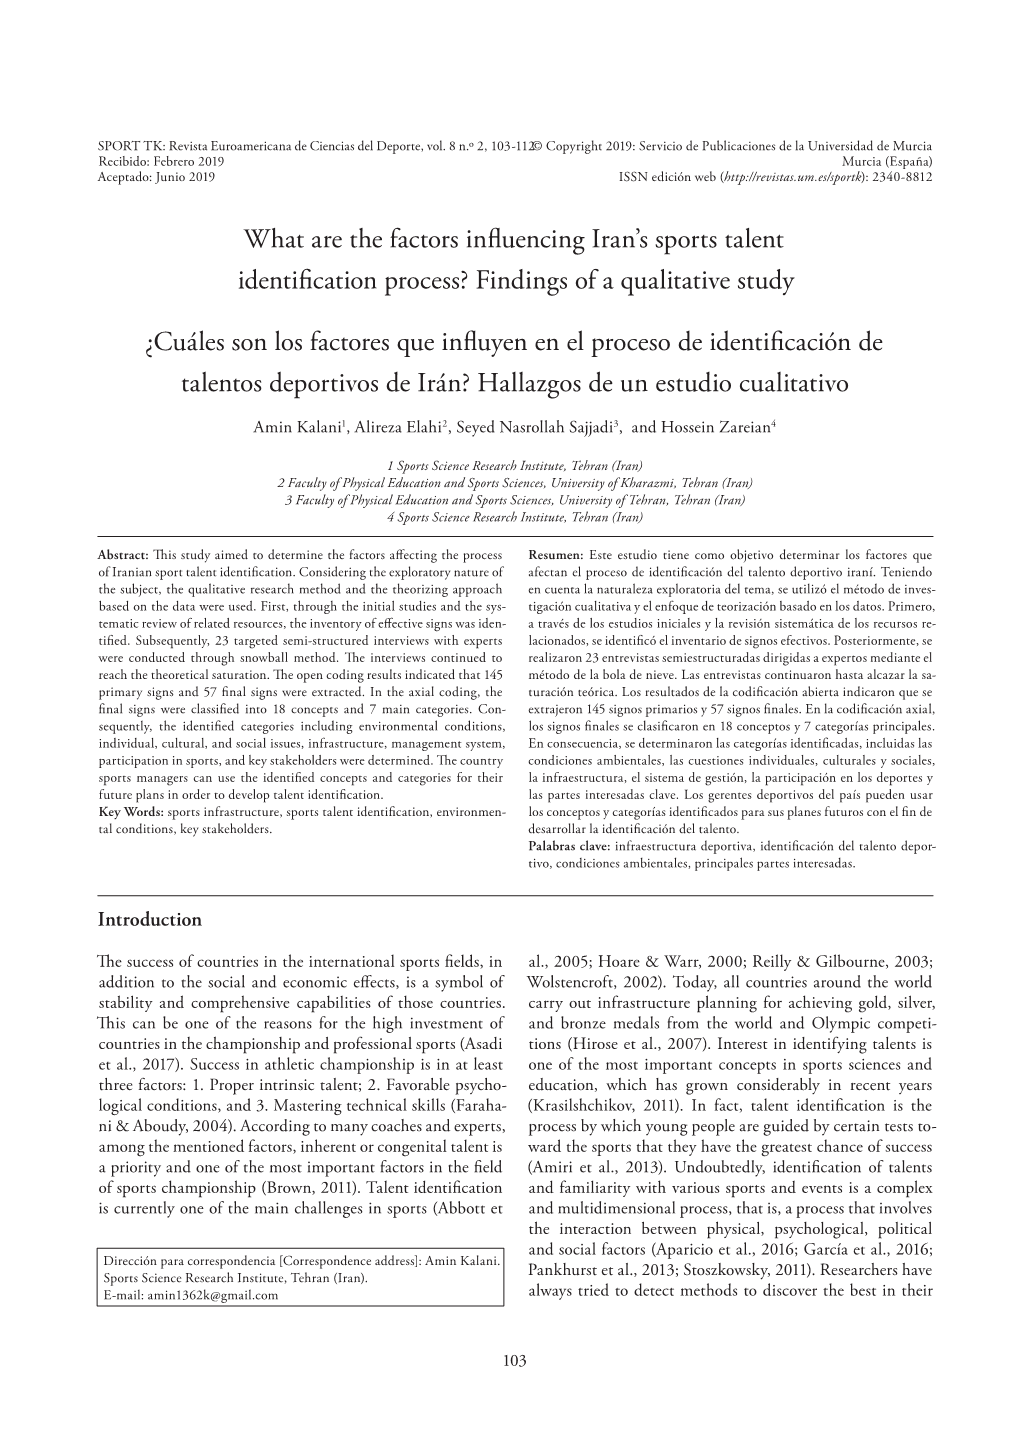 What Are the Factors Influencing Iran's Sports Talent Identification Process? Findings of a Qualitative Study ¿Cuáles Son Lo